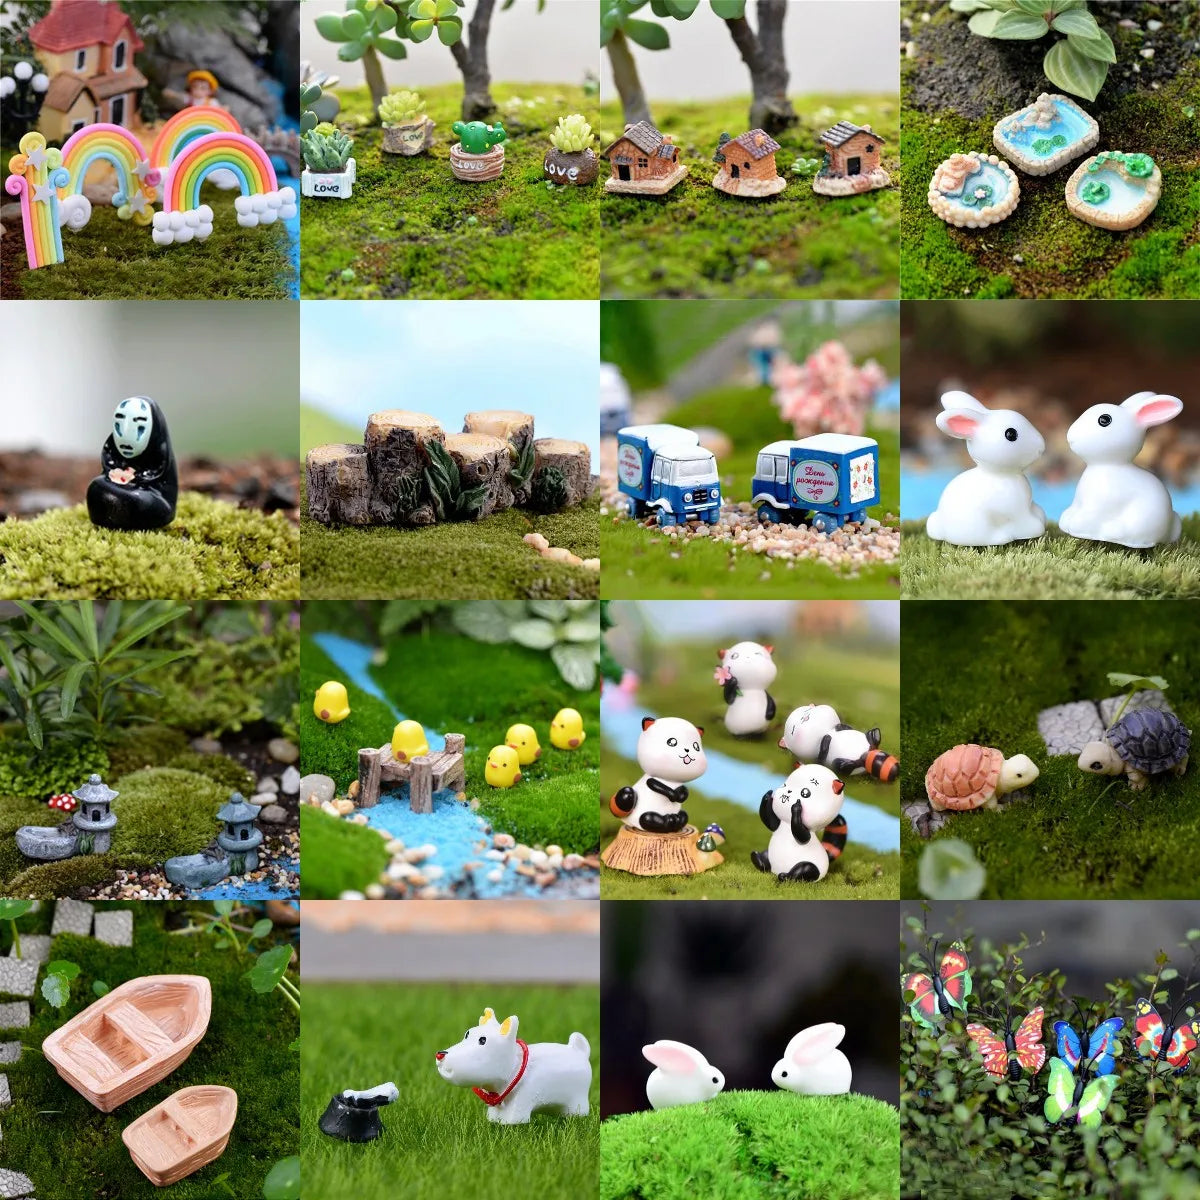 Adorable Miniature Animal Figurines and Houses - Perfect for Fairy Gardens, Bonsai, Home Décor